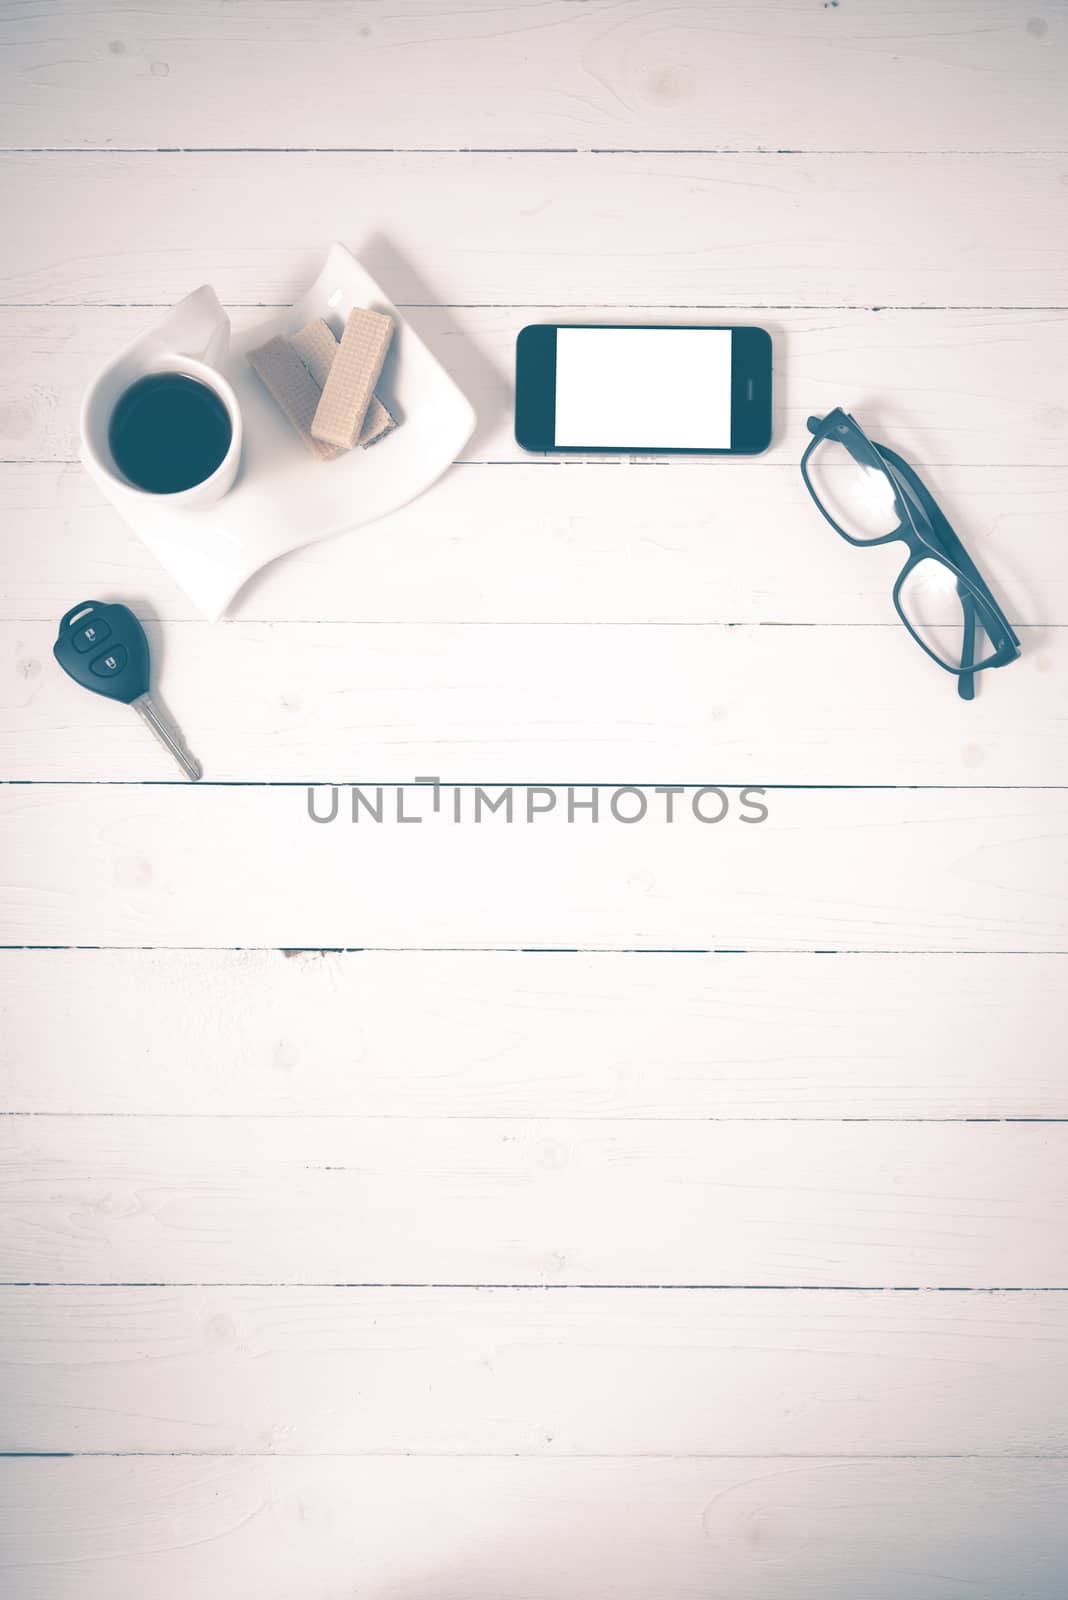 coffee cup with wafer,phone,car key,eyeglasses on white wood background vintage style